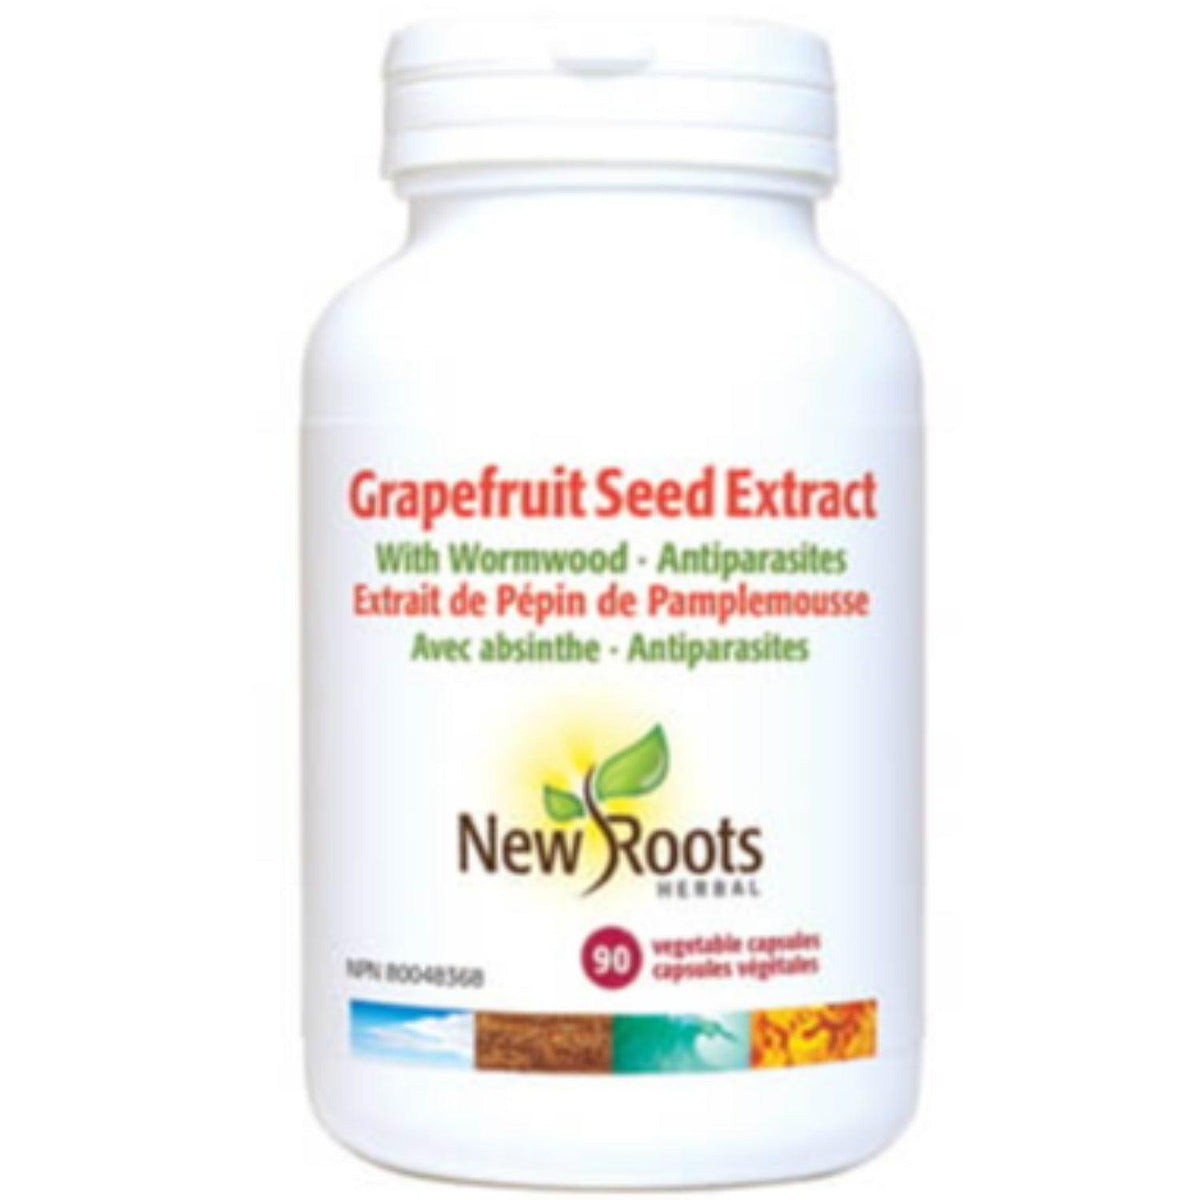 New Roots Grapefruit Seed Extract 90 Veggie Caps Supplements at Village Vitamin Store